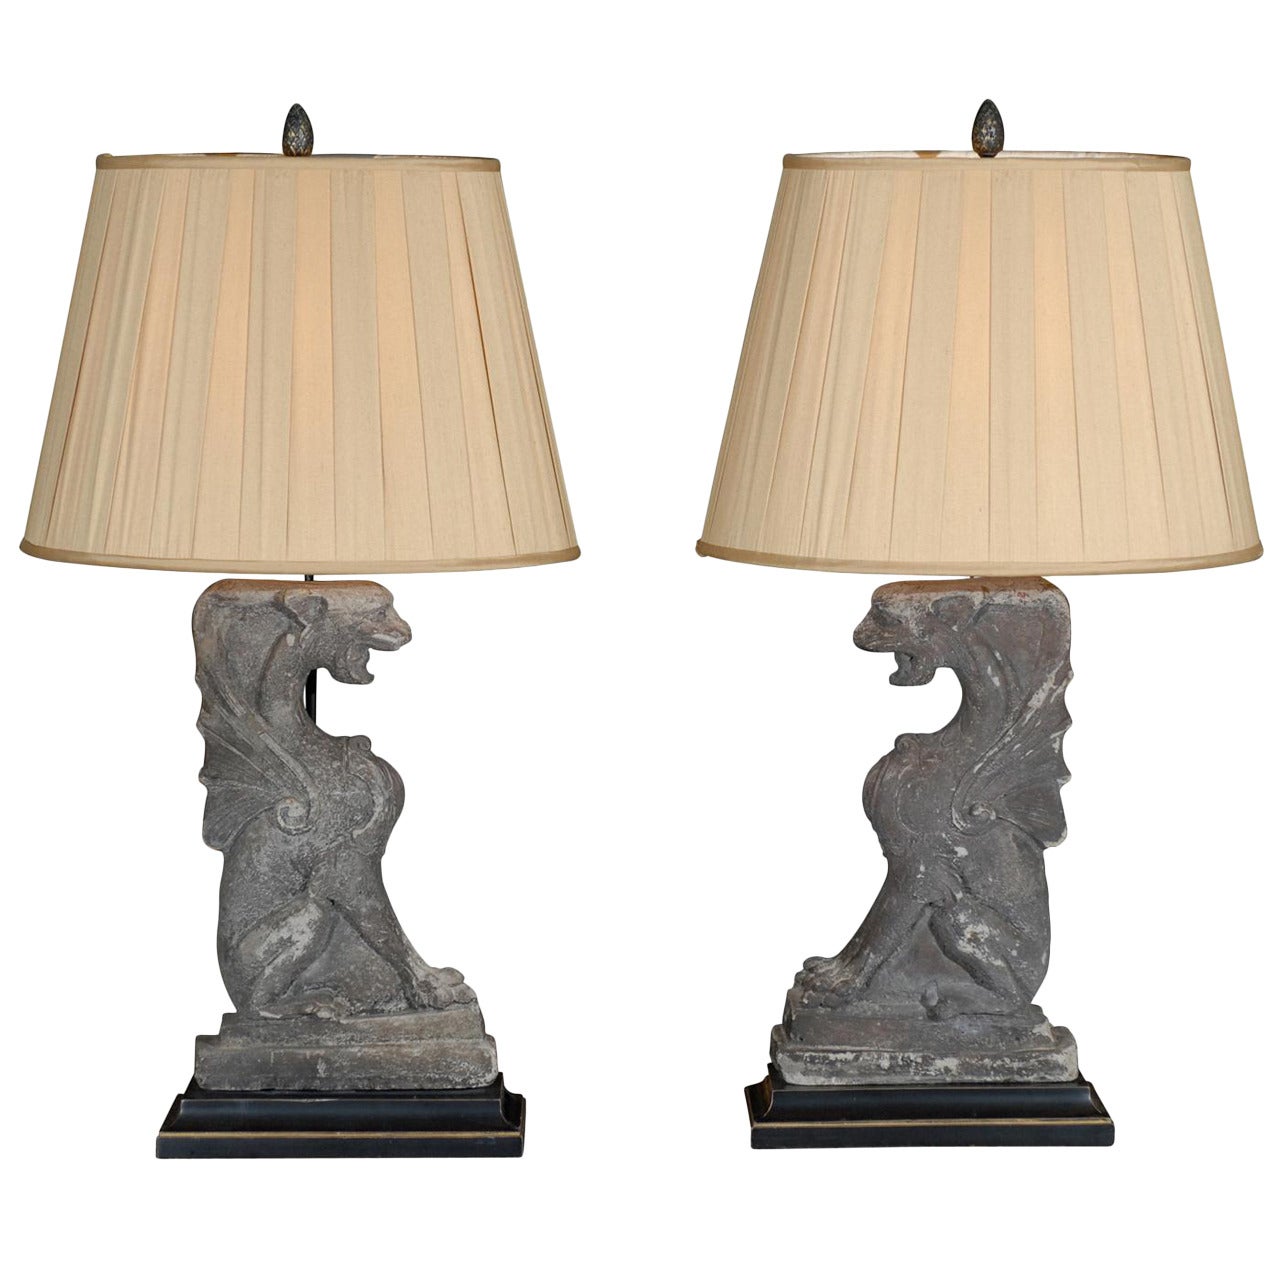 Wonderful Architectural Elements Made into Lamps For Sale